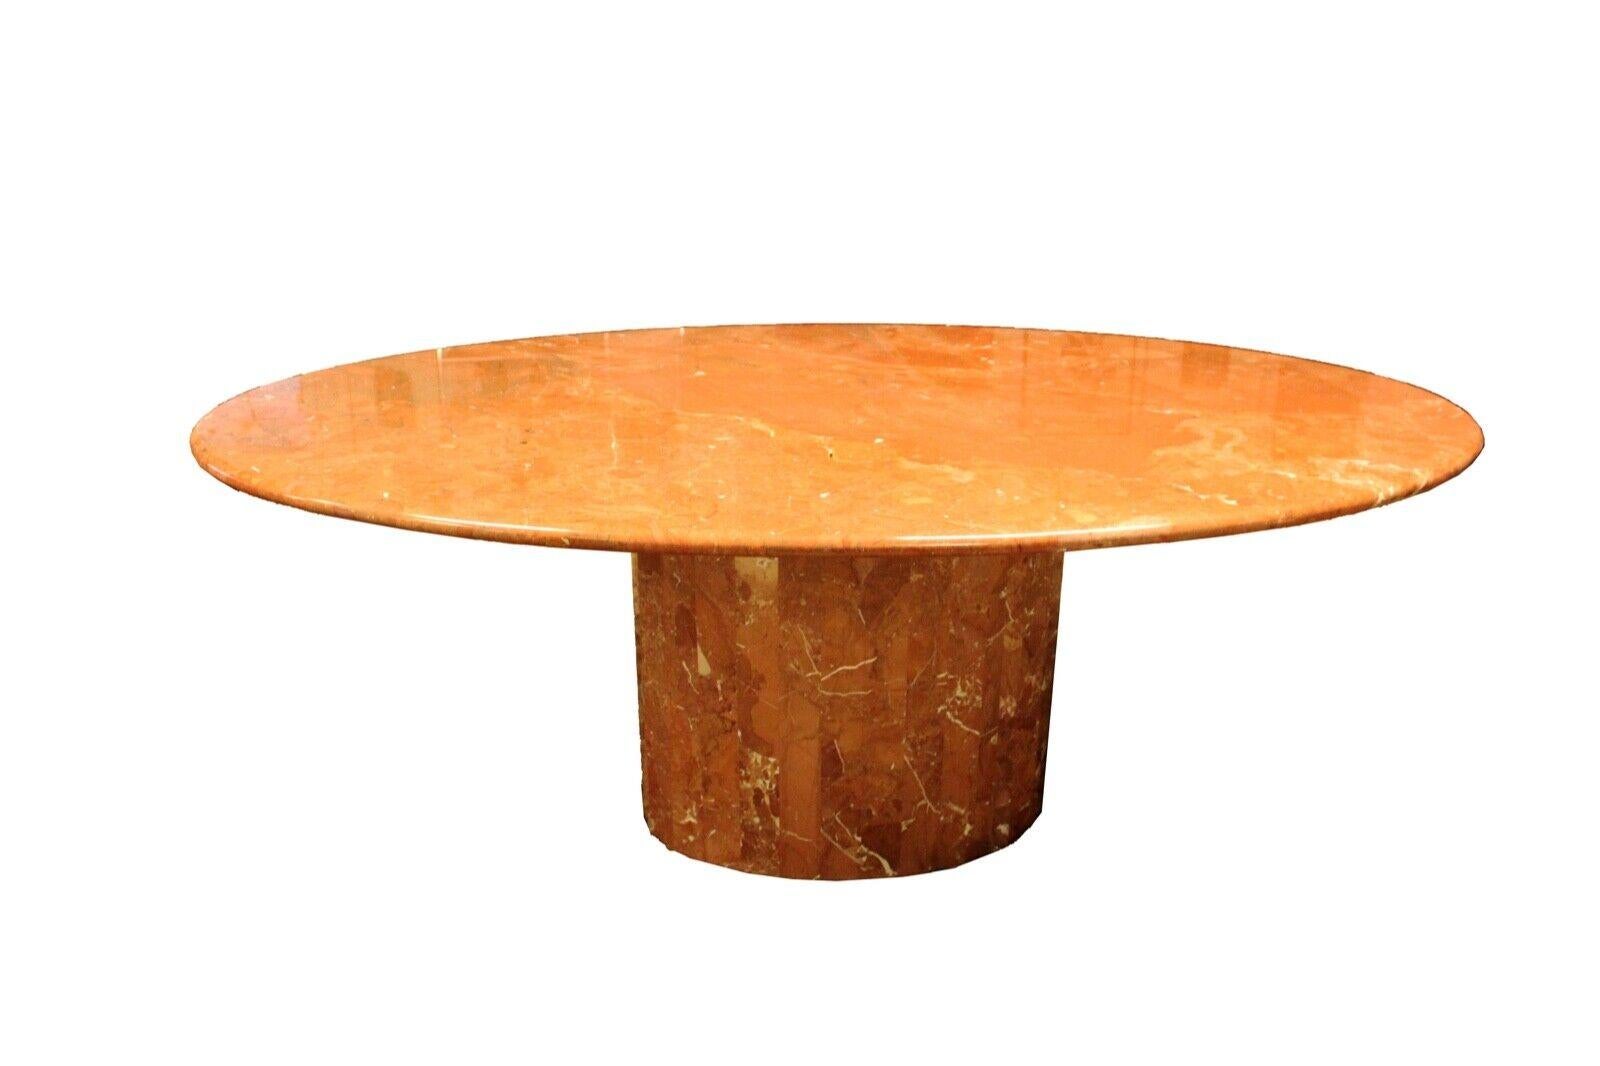 Italian Post Modern faceted base dining table. This captivating rust colored gorgeous marbled dining room table. In very good condition. Dimensions: 78.5